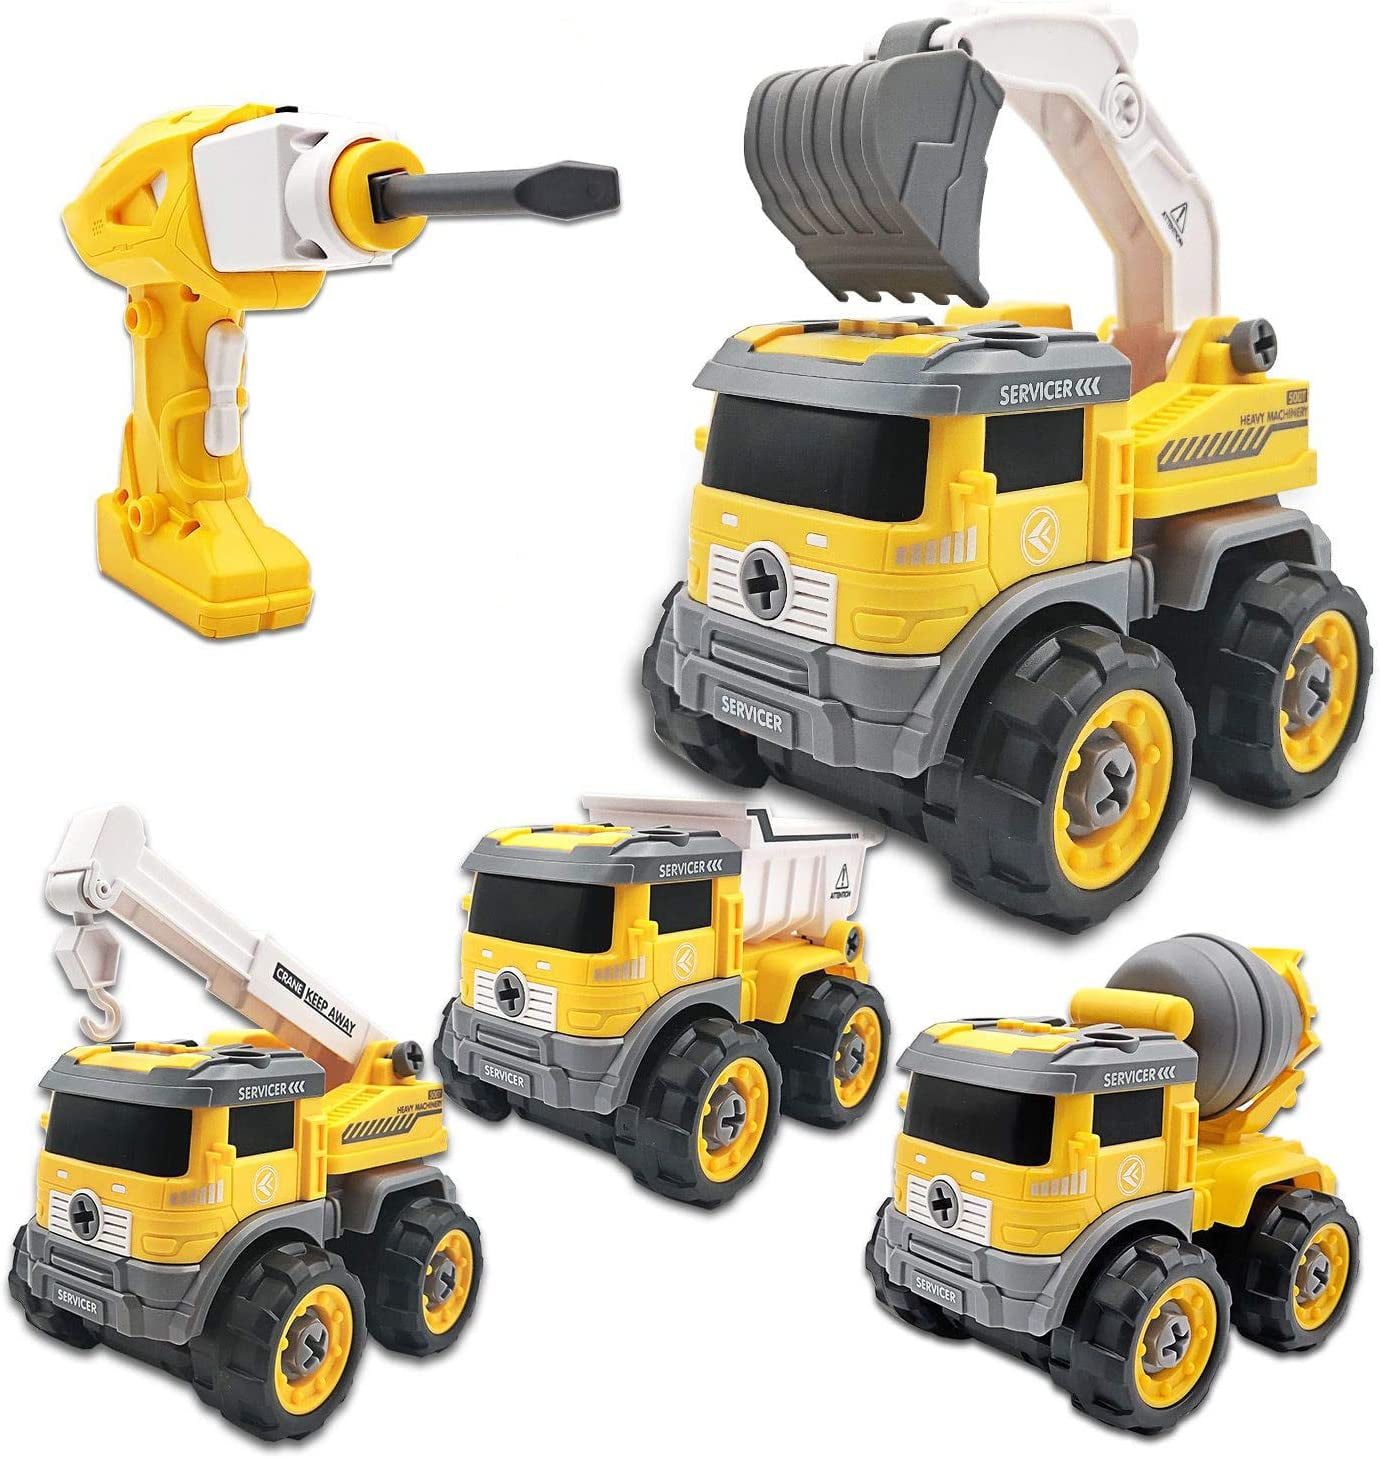 Red Truck deAO Take Apart Construction RC Truck Playset 2in1 RC Vehicle with Electronic Drill Tool Building Set for Boys Girl Kids 